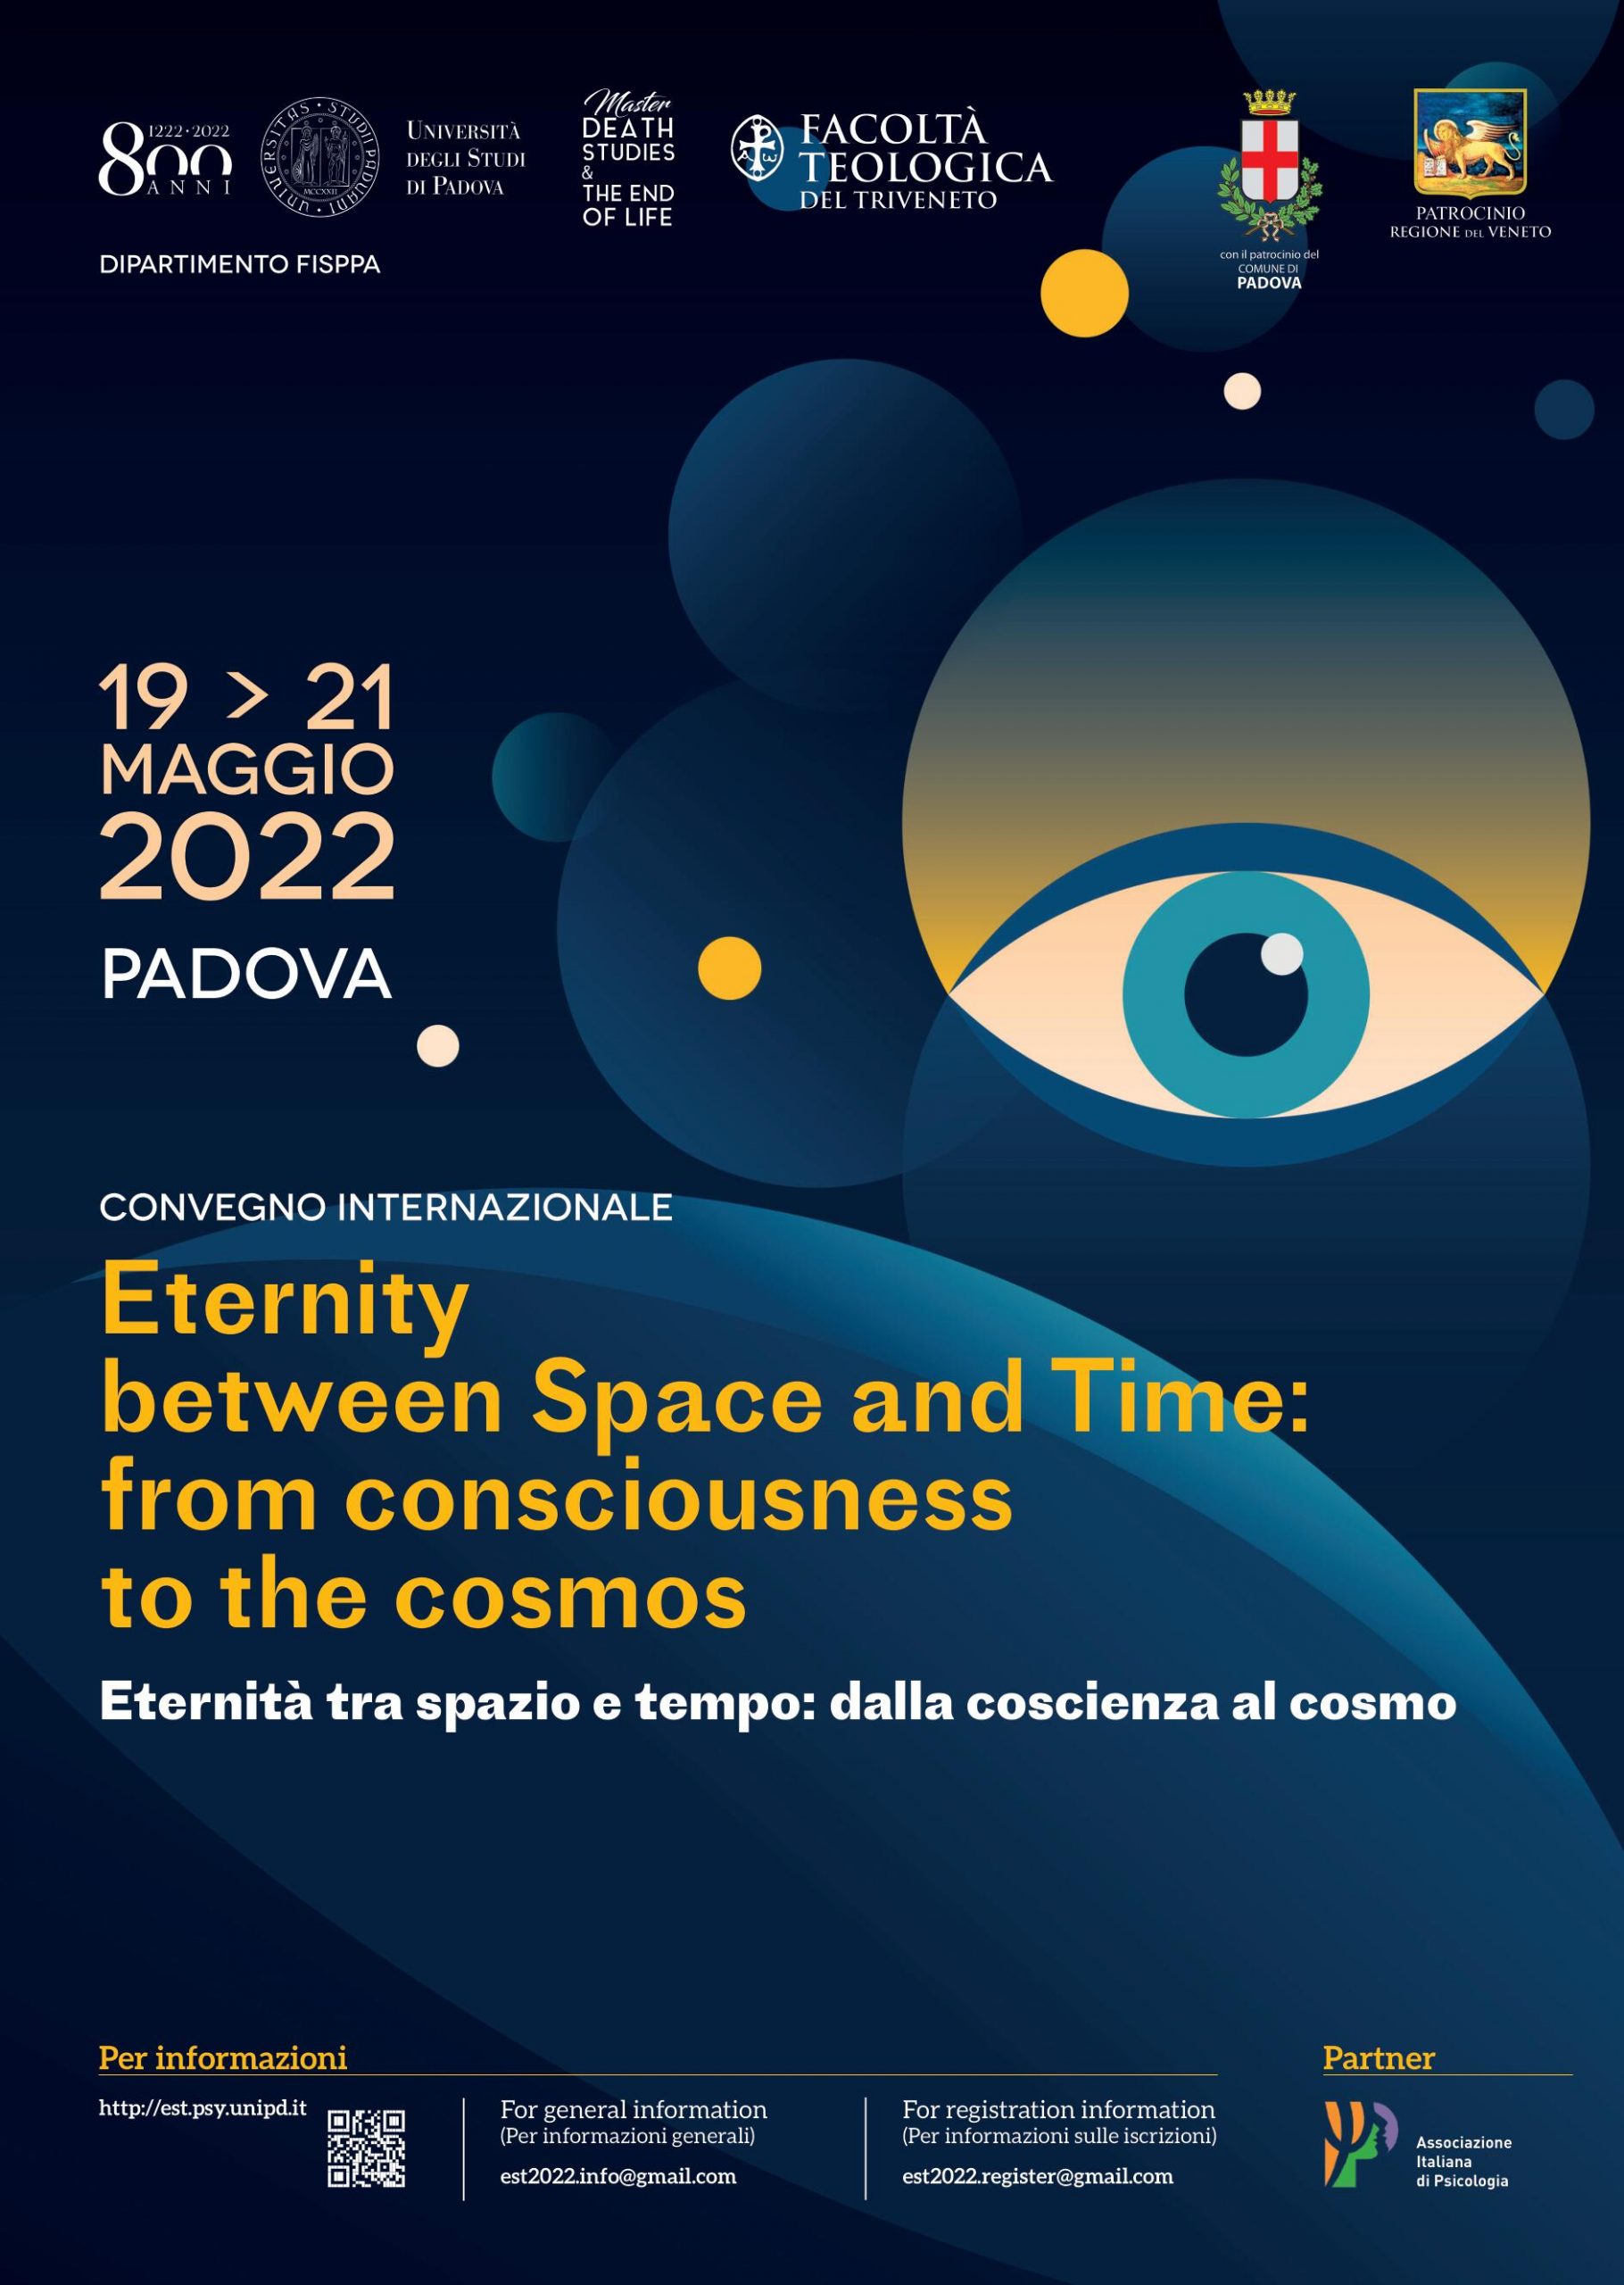 Eternity between Space and Time: from consciousness to cosmos